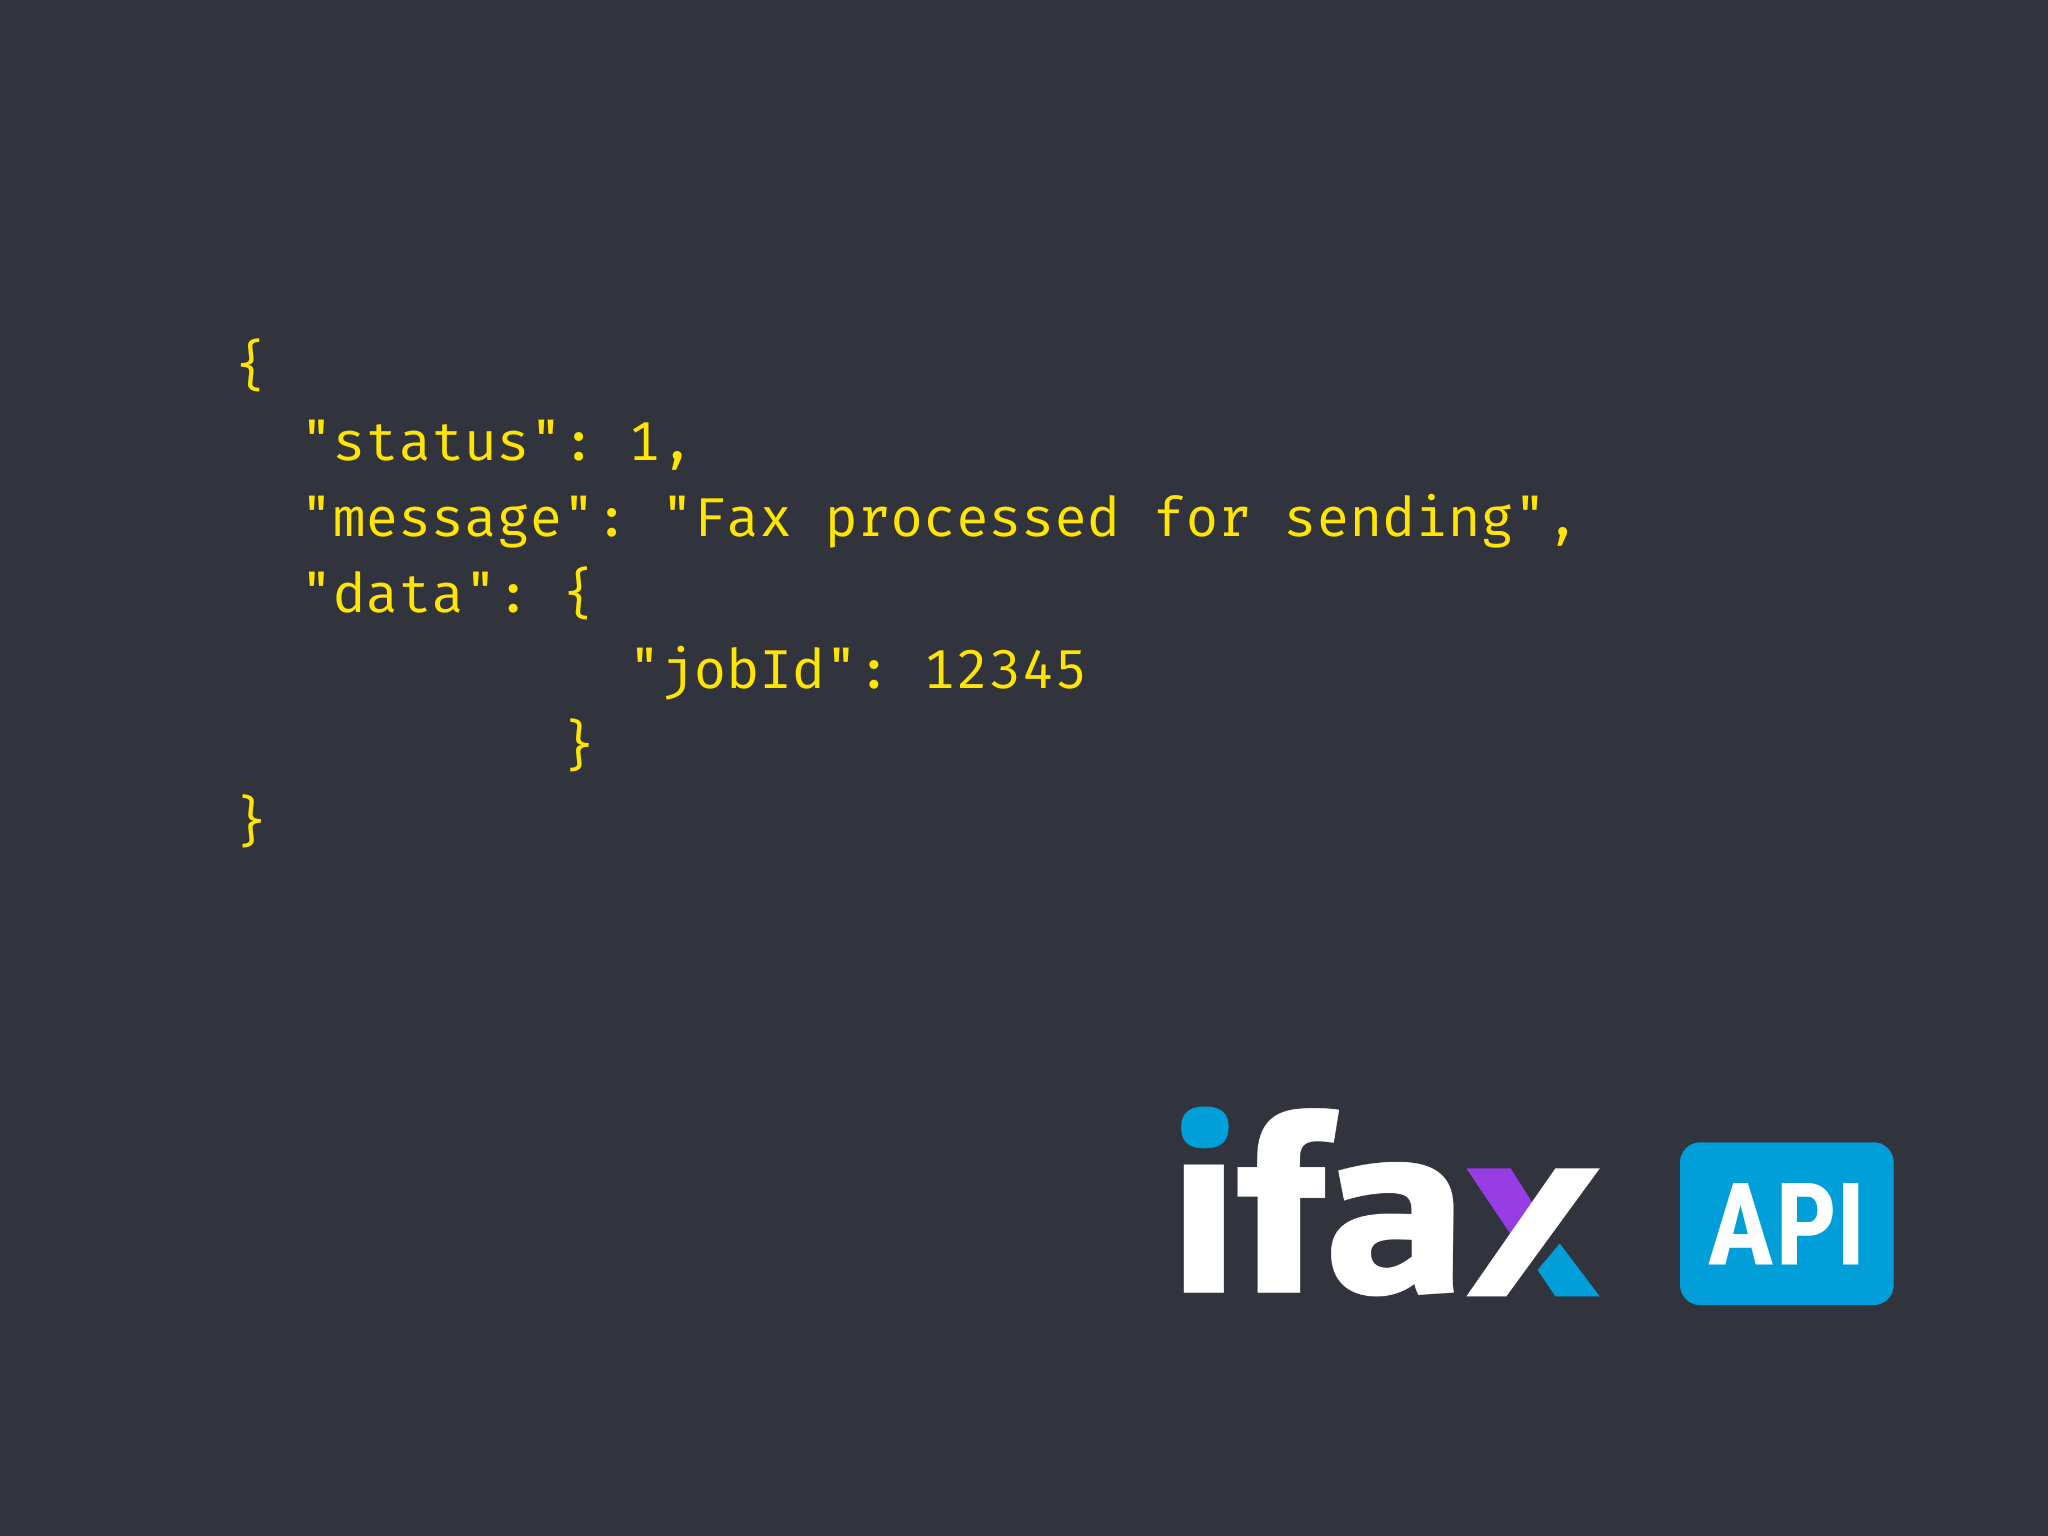 API To Send Fax: Overview, Benefits, and Uses